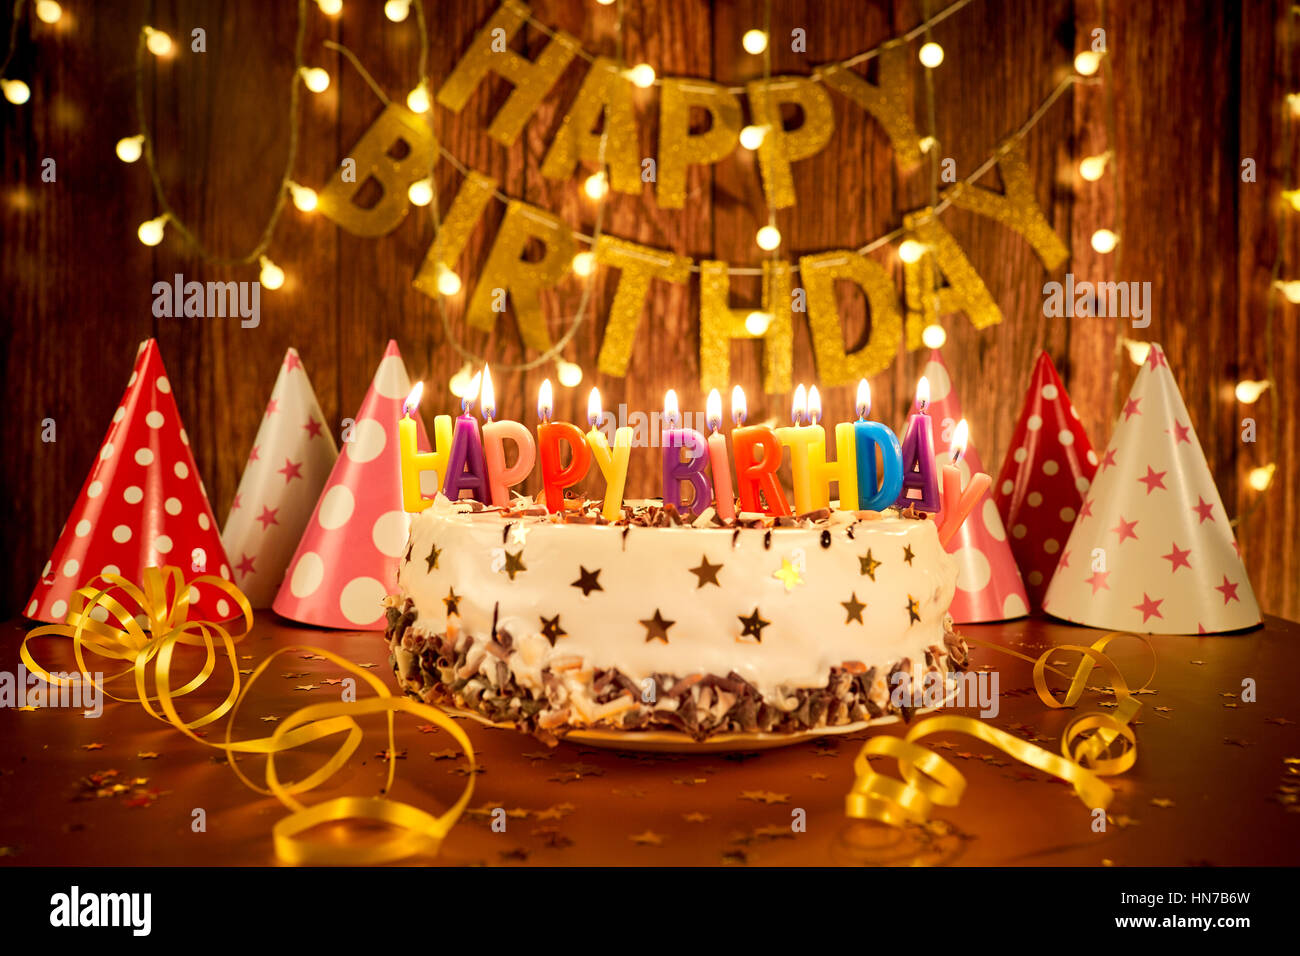 Happy birthday cake with candles on the background of garlands a ...